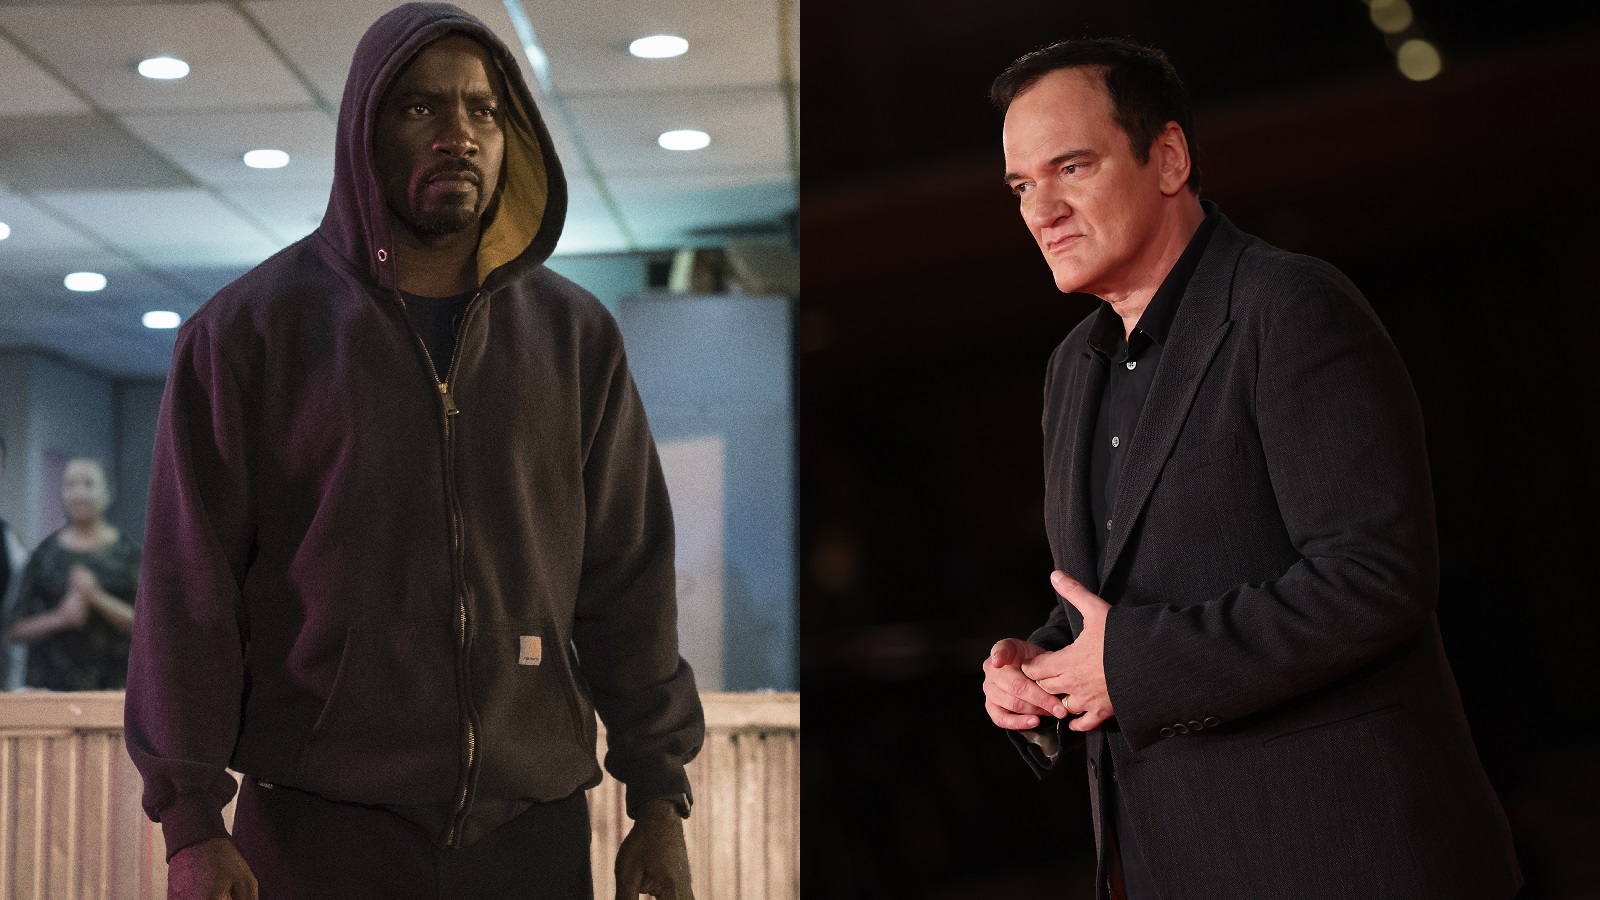 MCU fans ‘what if’ Quentin Tarantino’s resurrected Luke Cage movie